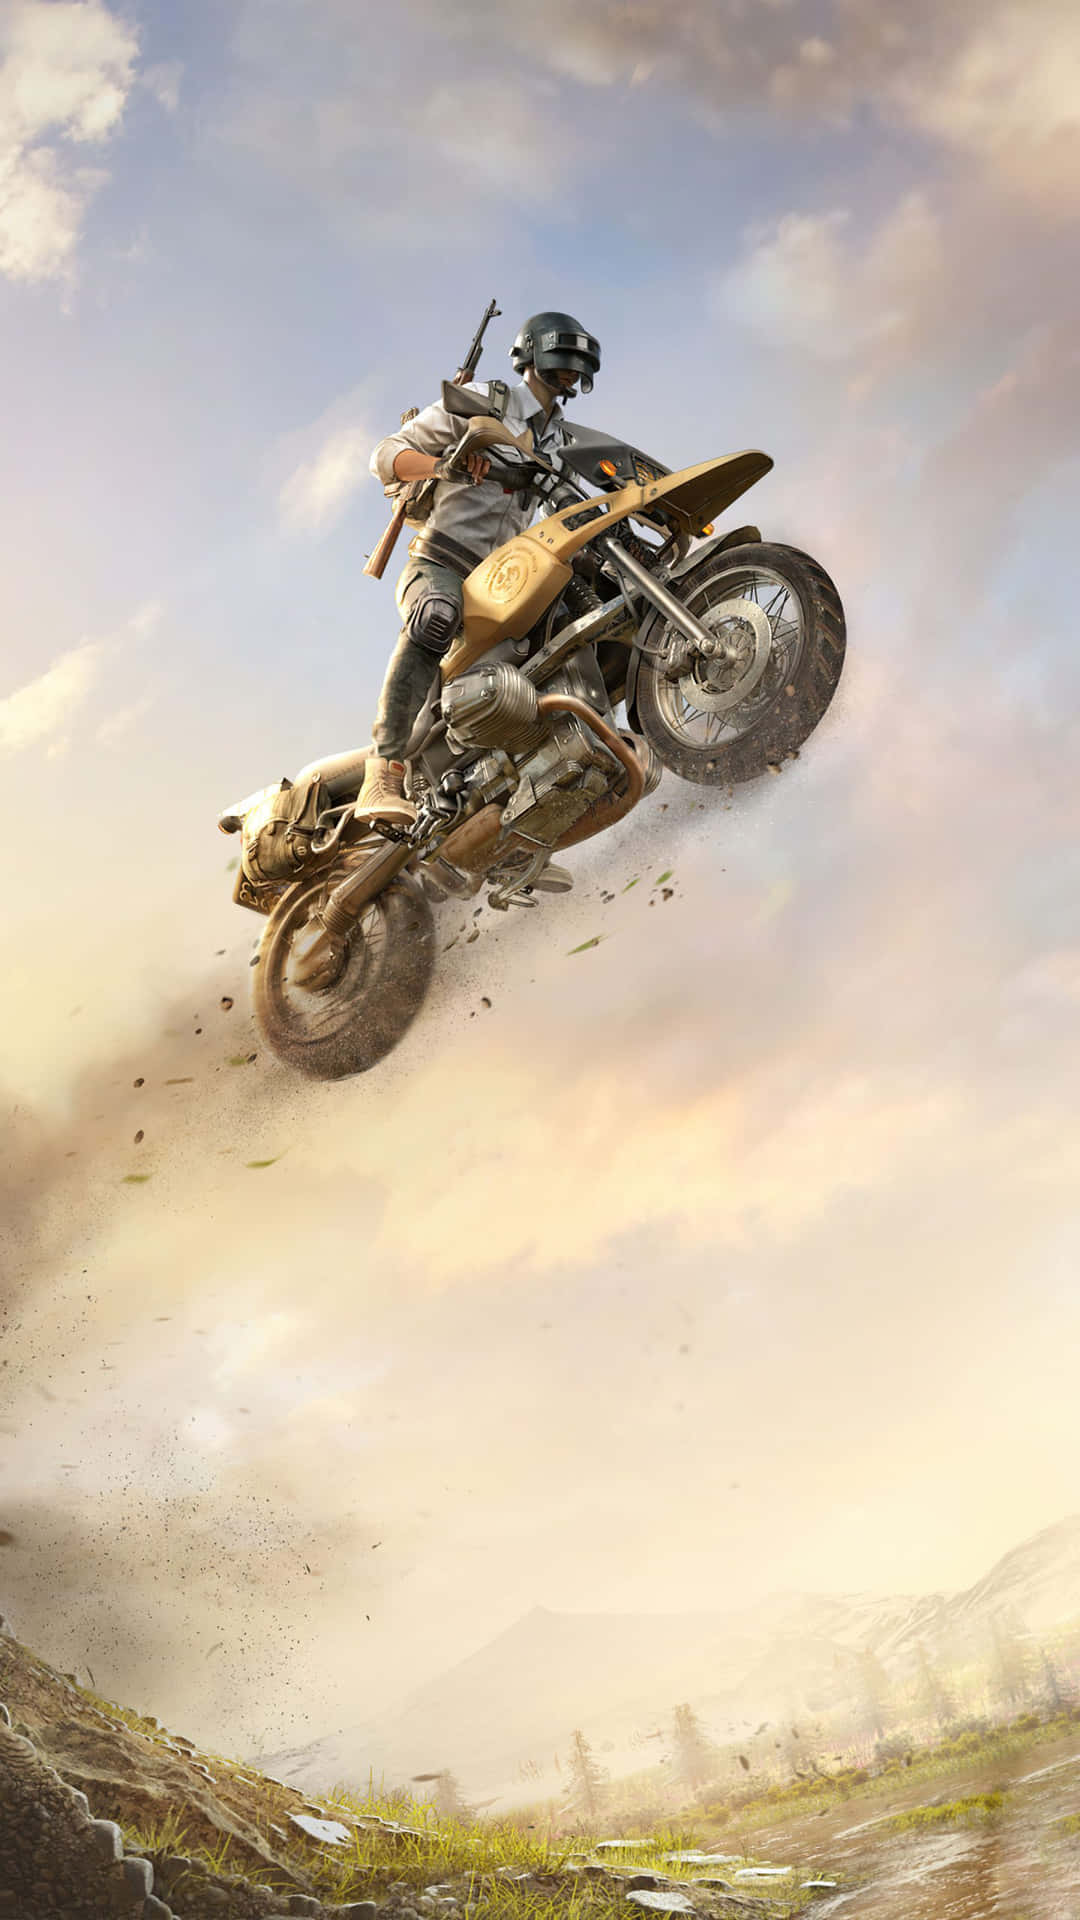 Riding on the back of a Motorcycle Into the Distance Wallpaper